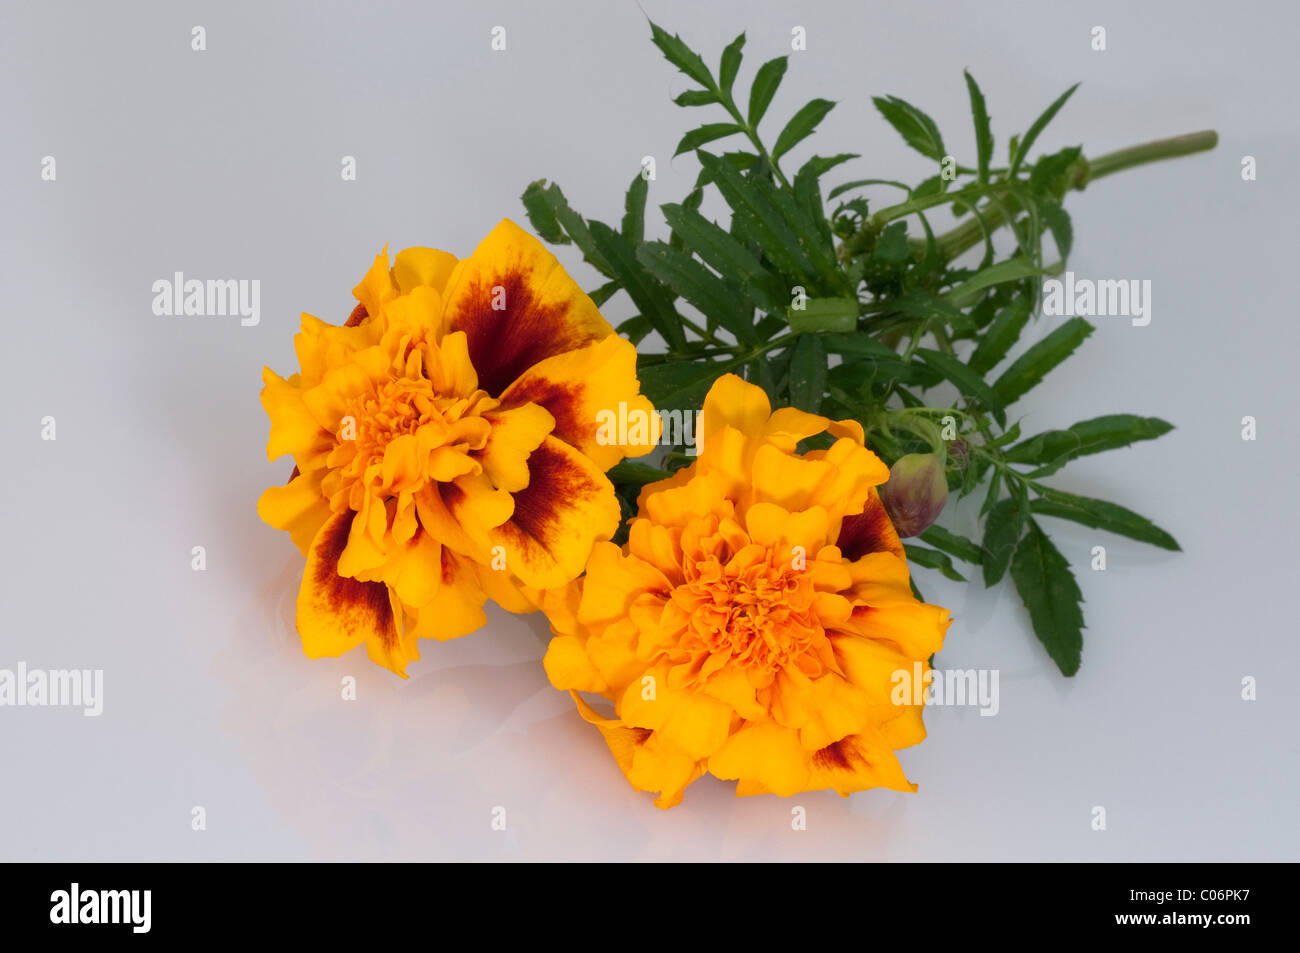 Mexican Marigold (Tagetes erecta), flowering stem. Studio picture against a white background. Stock Photo